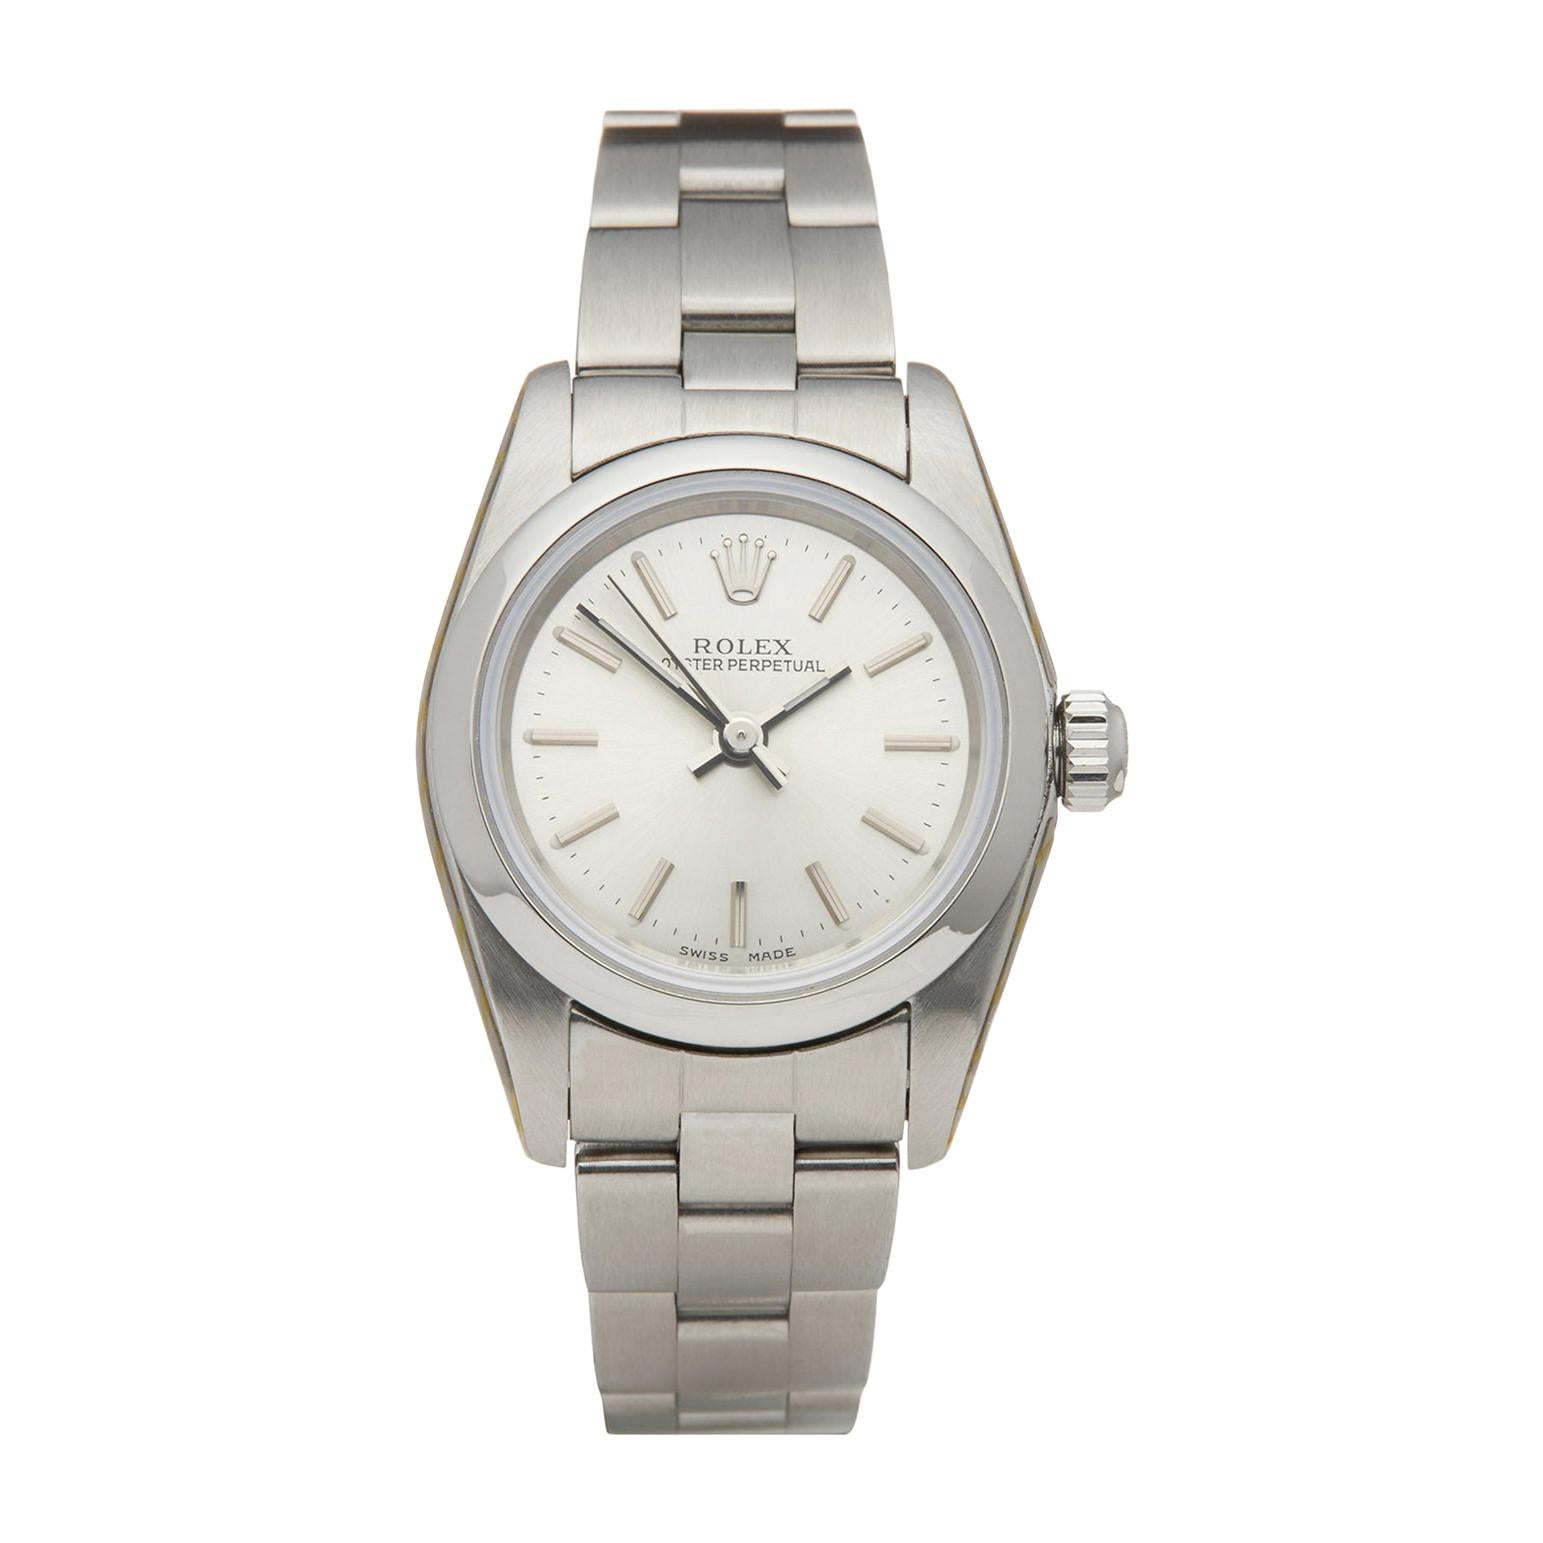 Rolex Oyster Perpetual 24 Stainless Steel 76080 Wristwatch